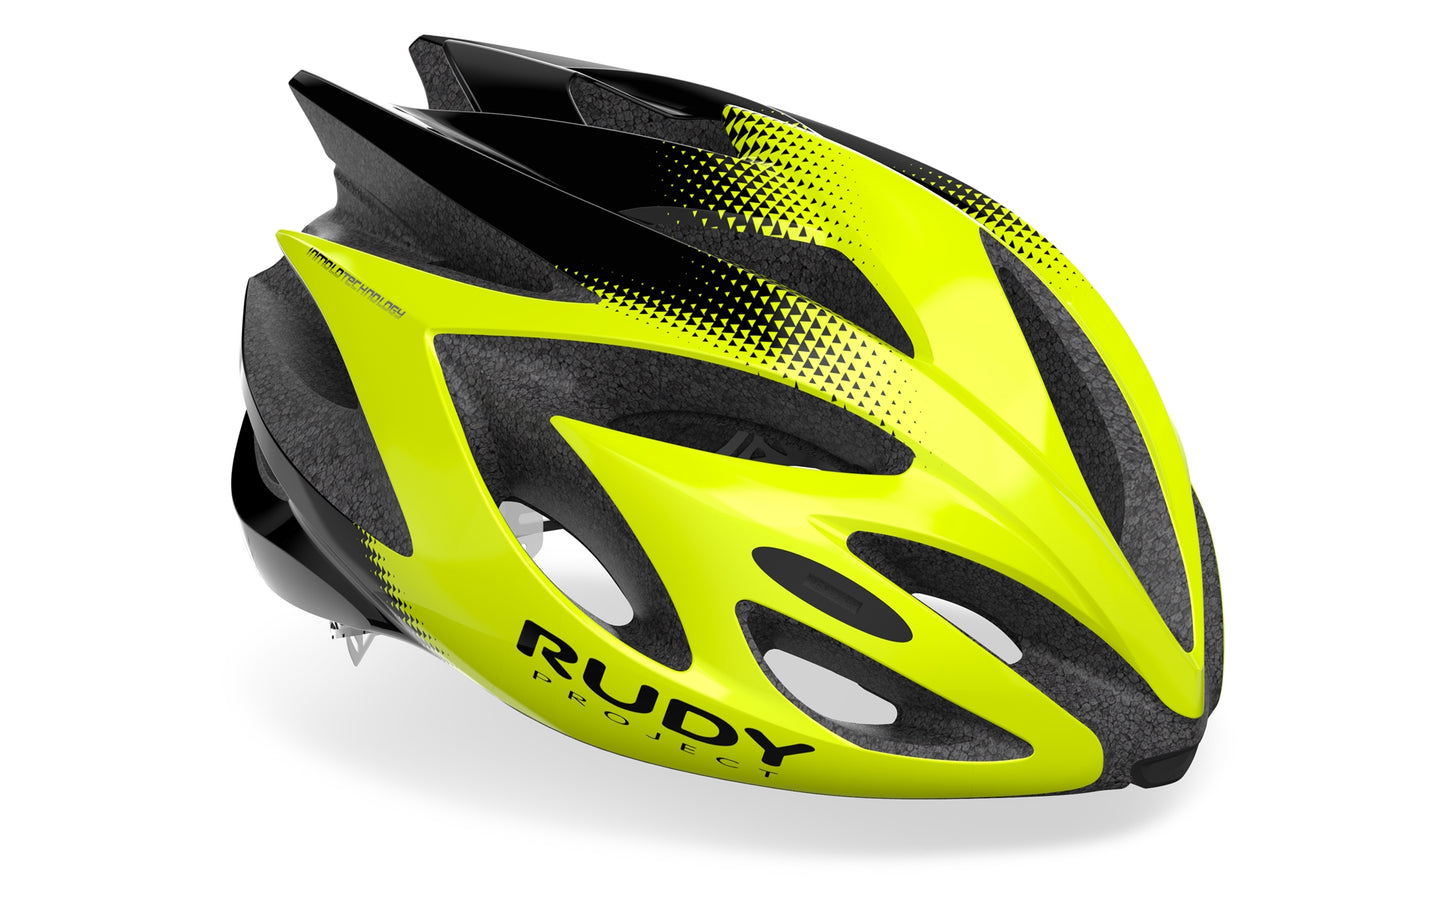 Rudy Project Spinair 57 Rush - Yellow Fluo/Black (Shiny) Sunglasses